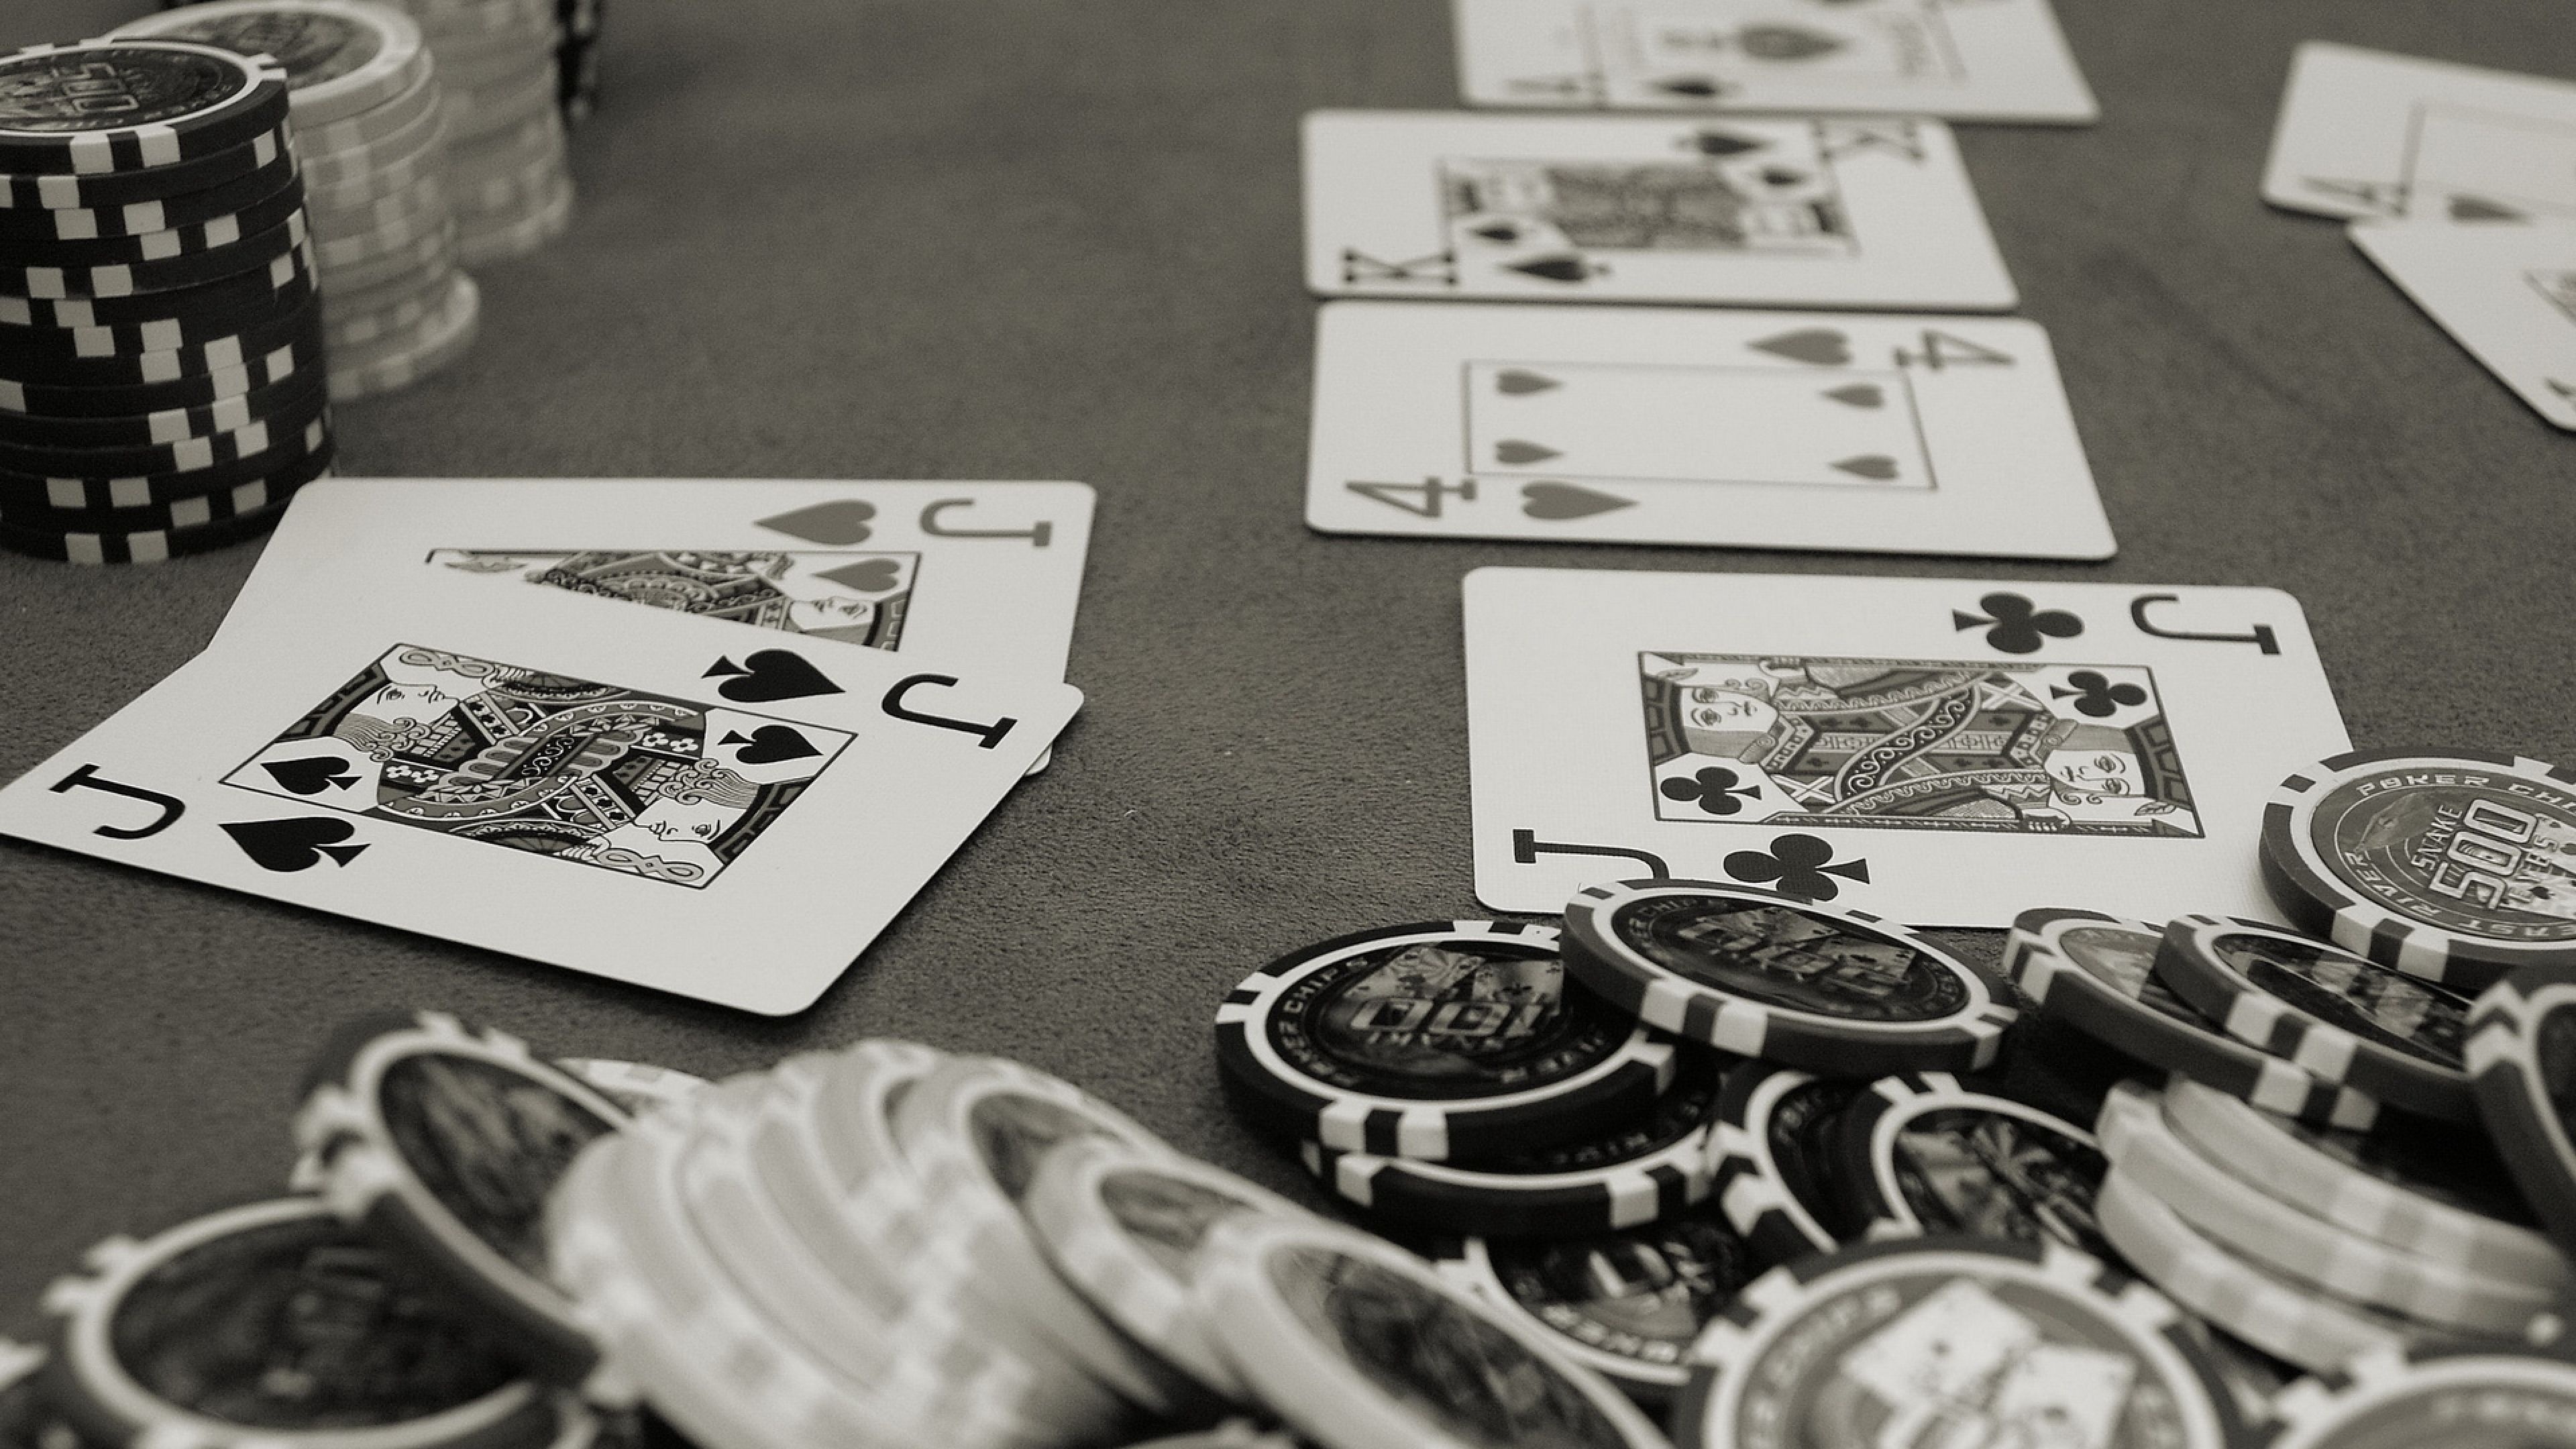 Poker: Black and white, A social activity, Cards, Table top, Poker hands. 3840x2160 4K Background.